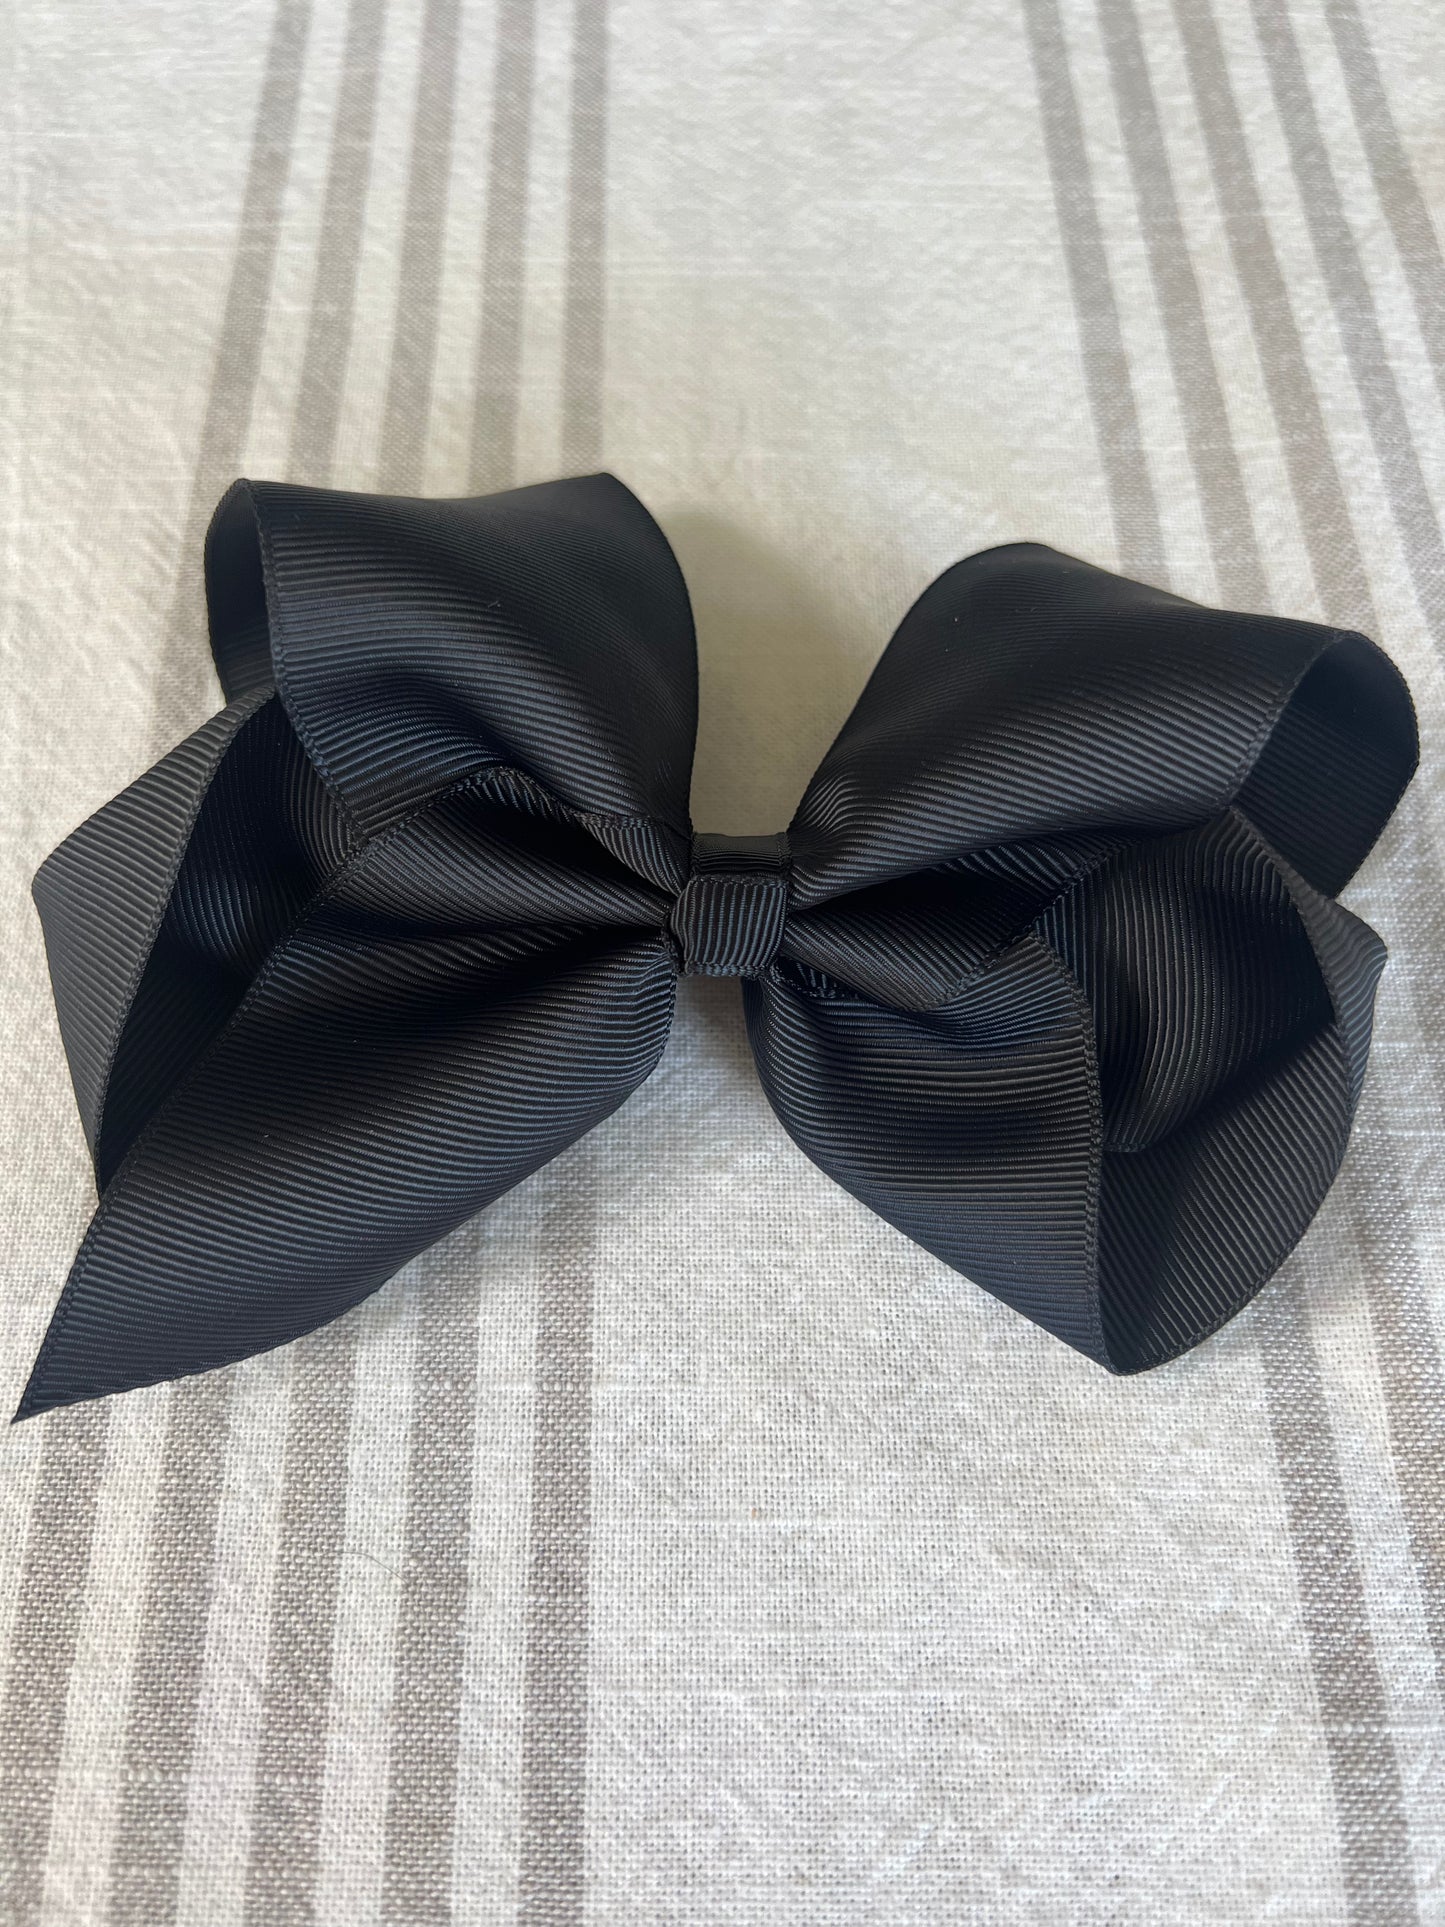 Black, White, and Gold Game Day Bow Collection